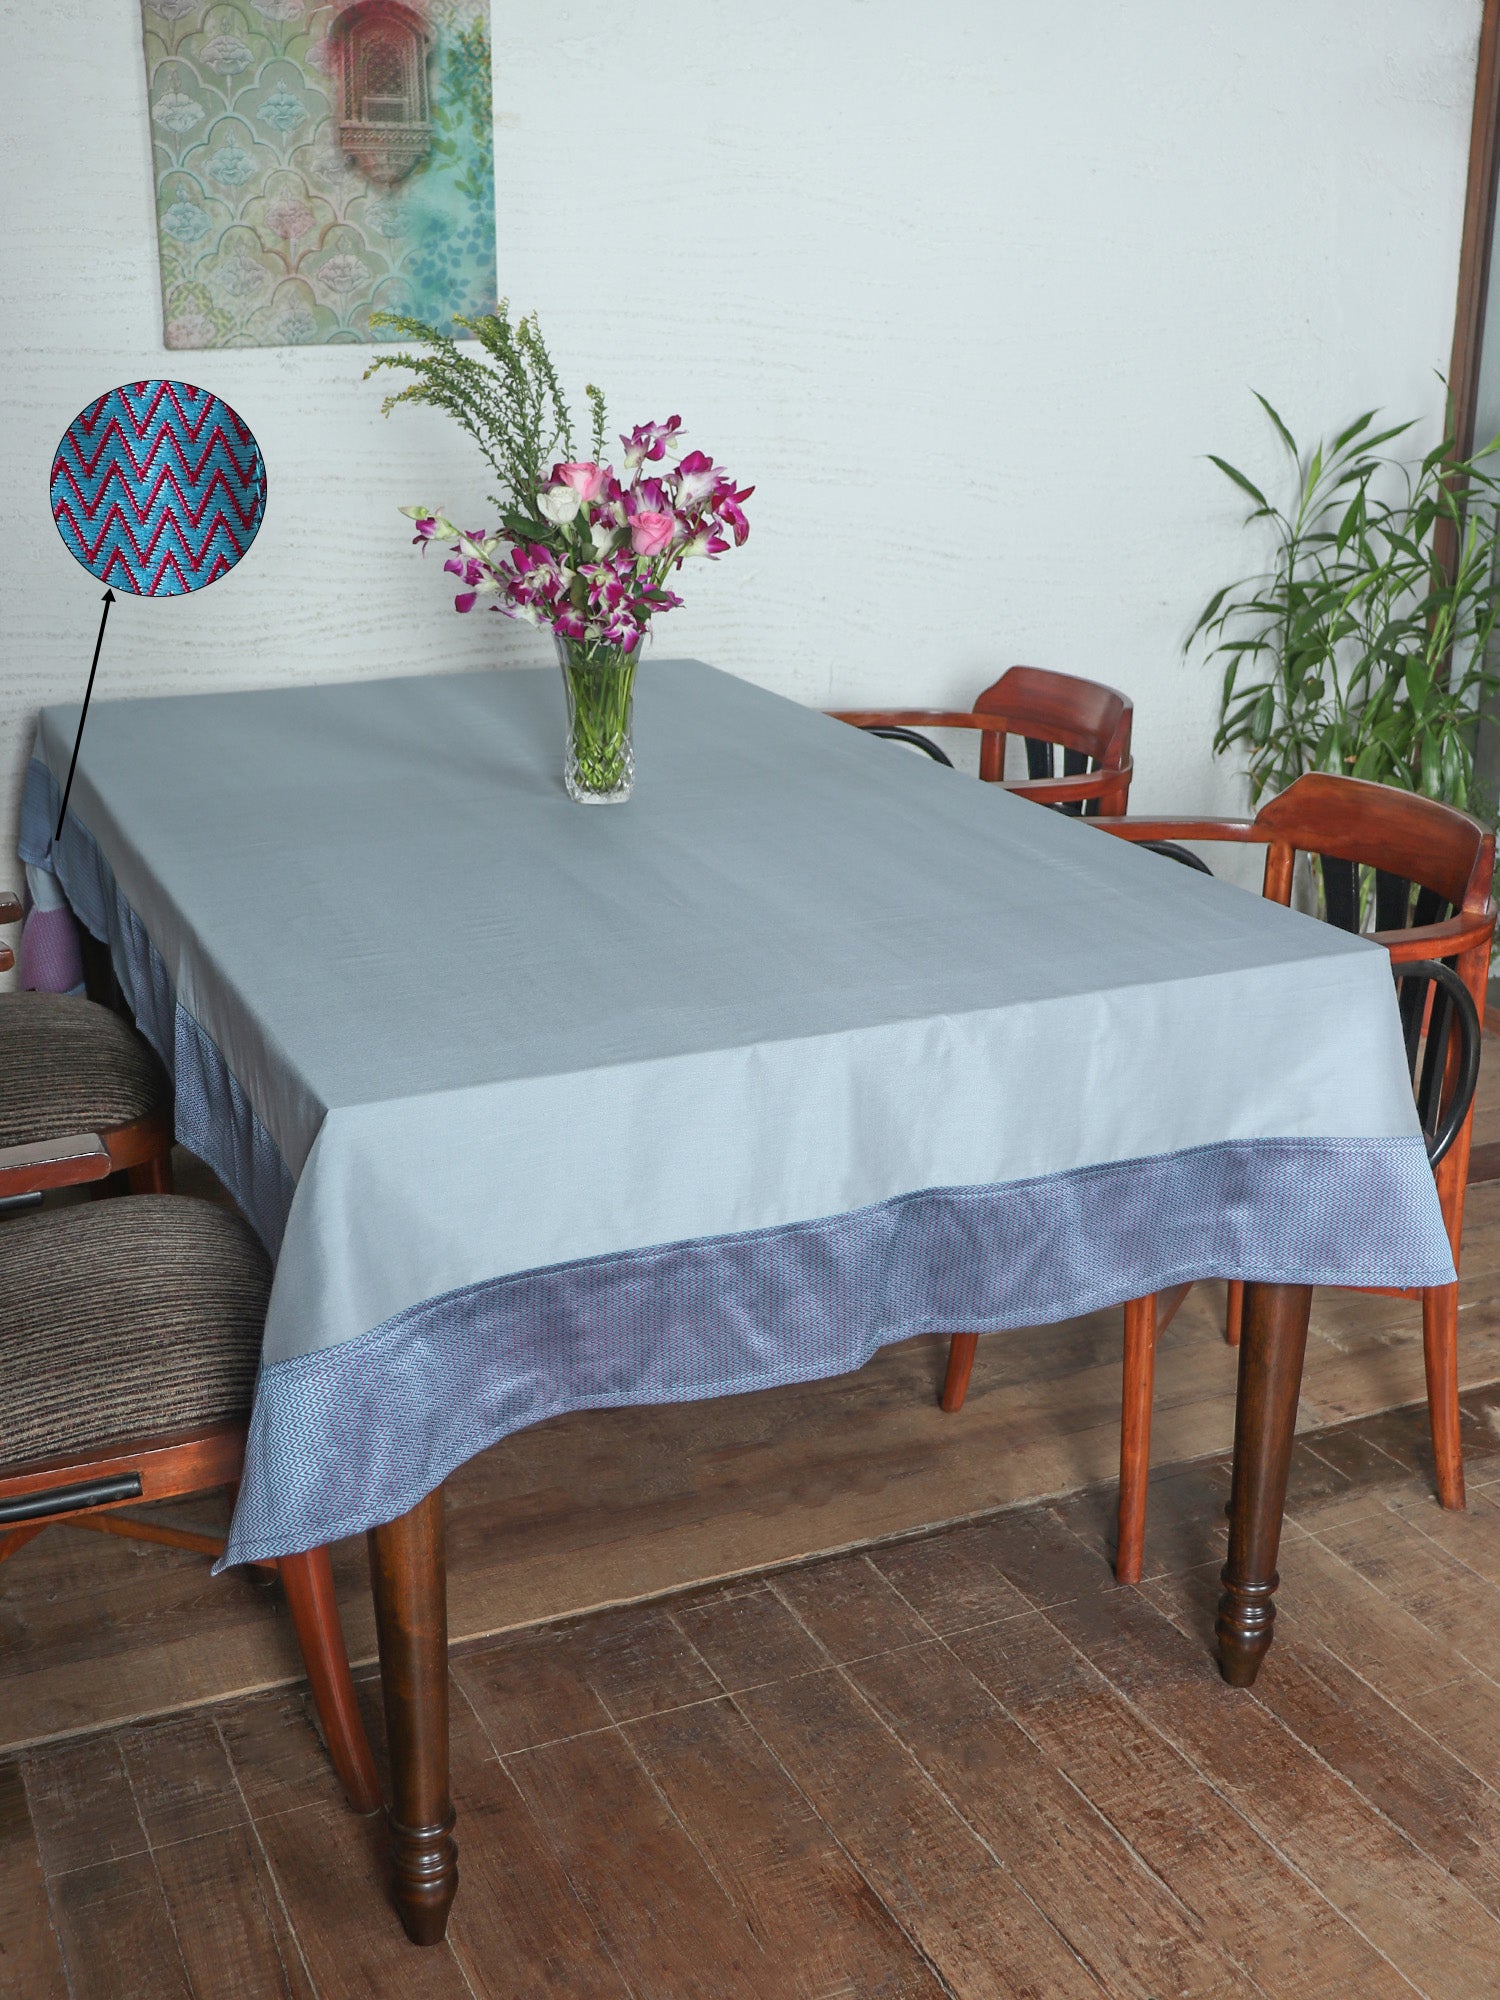 Table Cover with Panel Border with  Brocade Silk in Chevron Pattern | Blue | Heat Resistant Table Cover for Kitchen Table/Dining Table Cloth, 52 X 84 Inches; 130 cm X 210 cm 